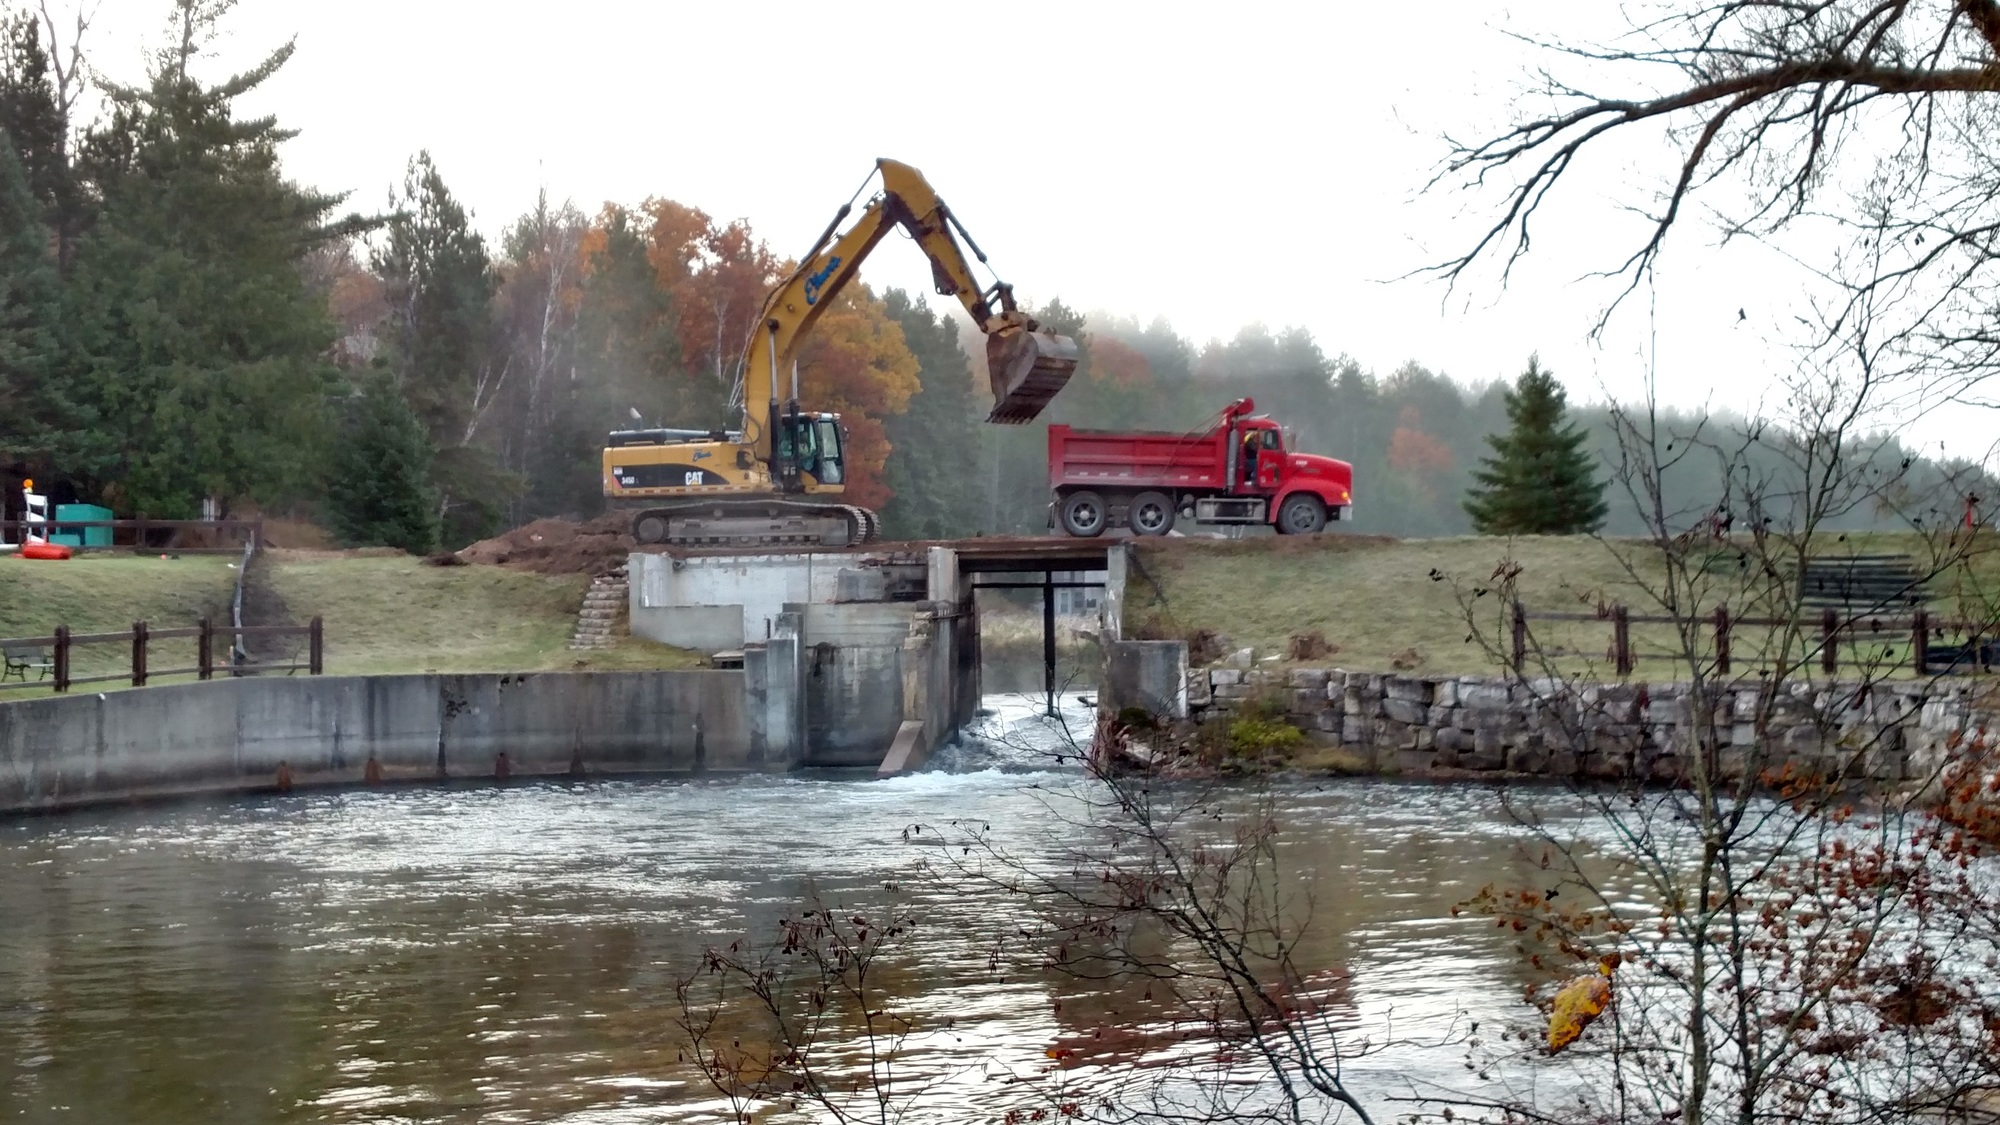 The dam over the Pigeon River recently removed through a cooperative effort and legal action.